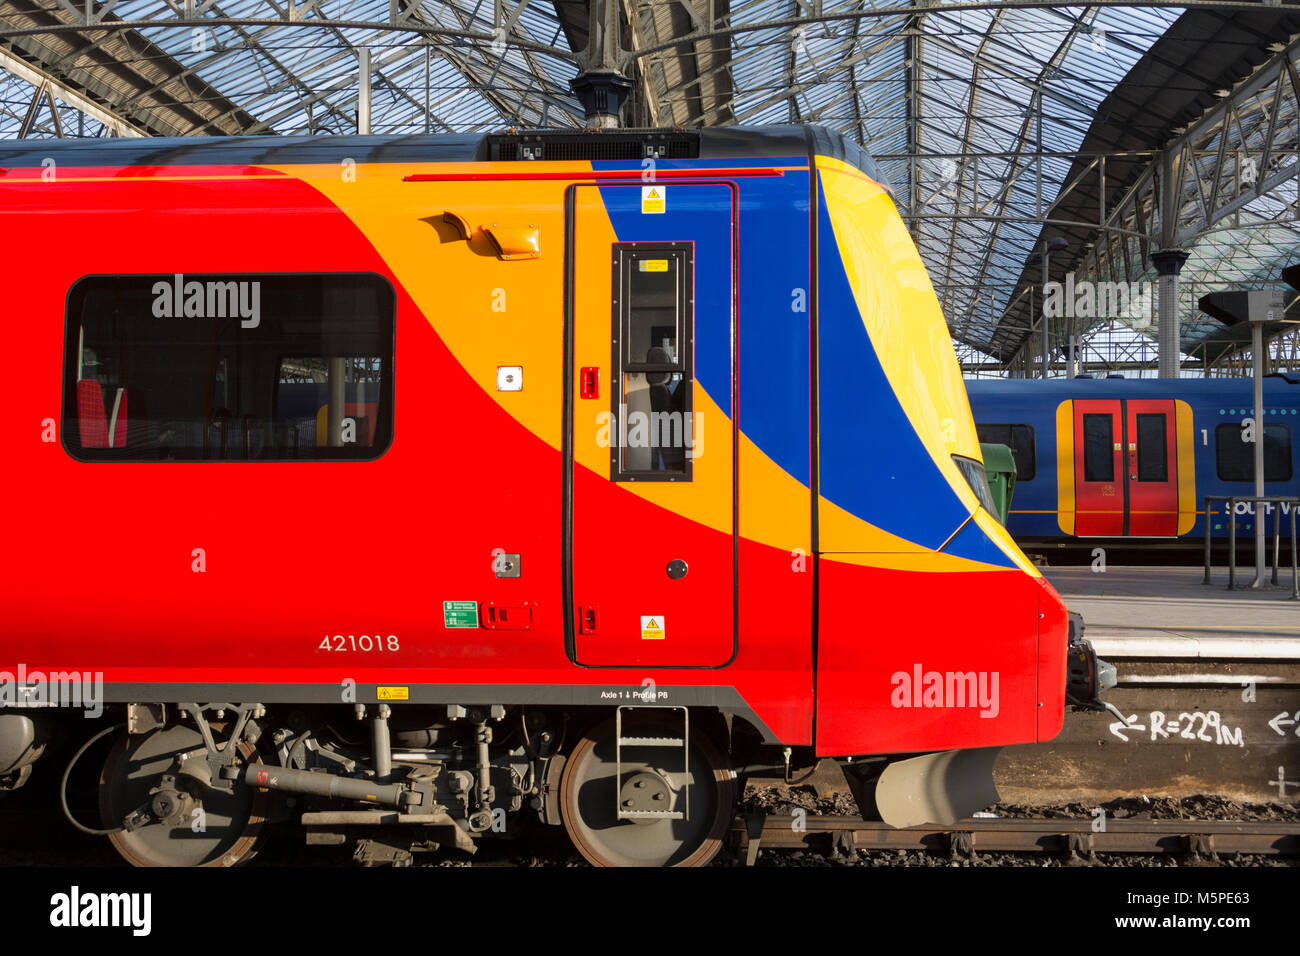 A First Group/MTR South Western Railway Desiro City class 707 train, built by Siemens, waiting at at the station. Stock Photo